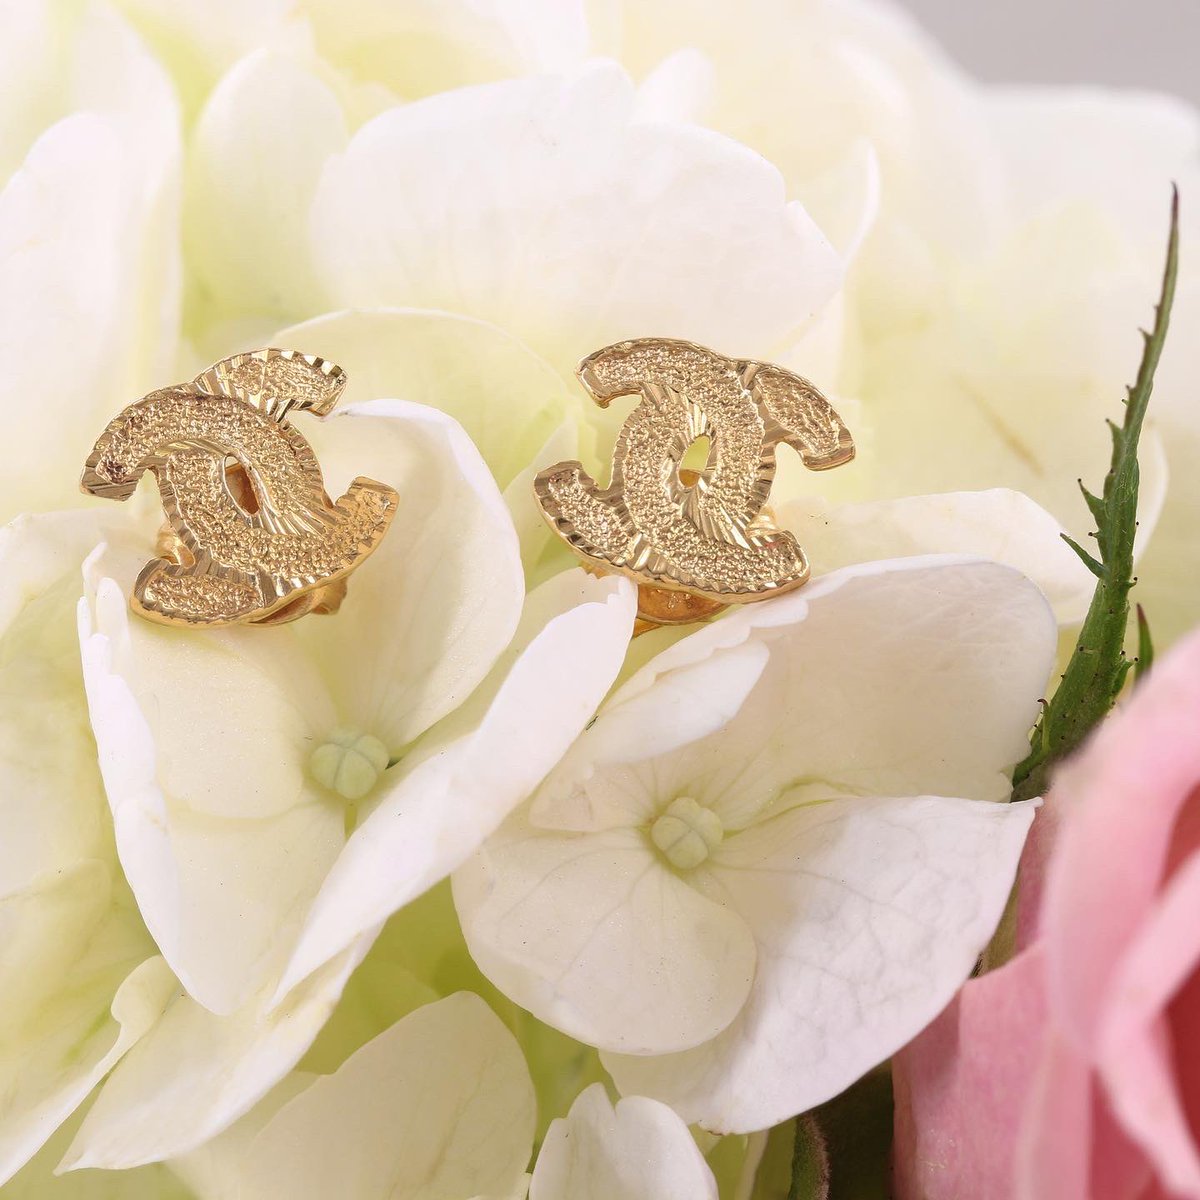 ✨ Celebrate Mom’s brilliance this Mother’s Day! ✨💖 Let her shine like never before! ✨ Buy now with 30% off, free shipping in EEUU, worldwide shipping available. Link in Bio. #MothersDayGifts #GoldEarrings #FineJewelry #GiftsForMom #777Jewelry